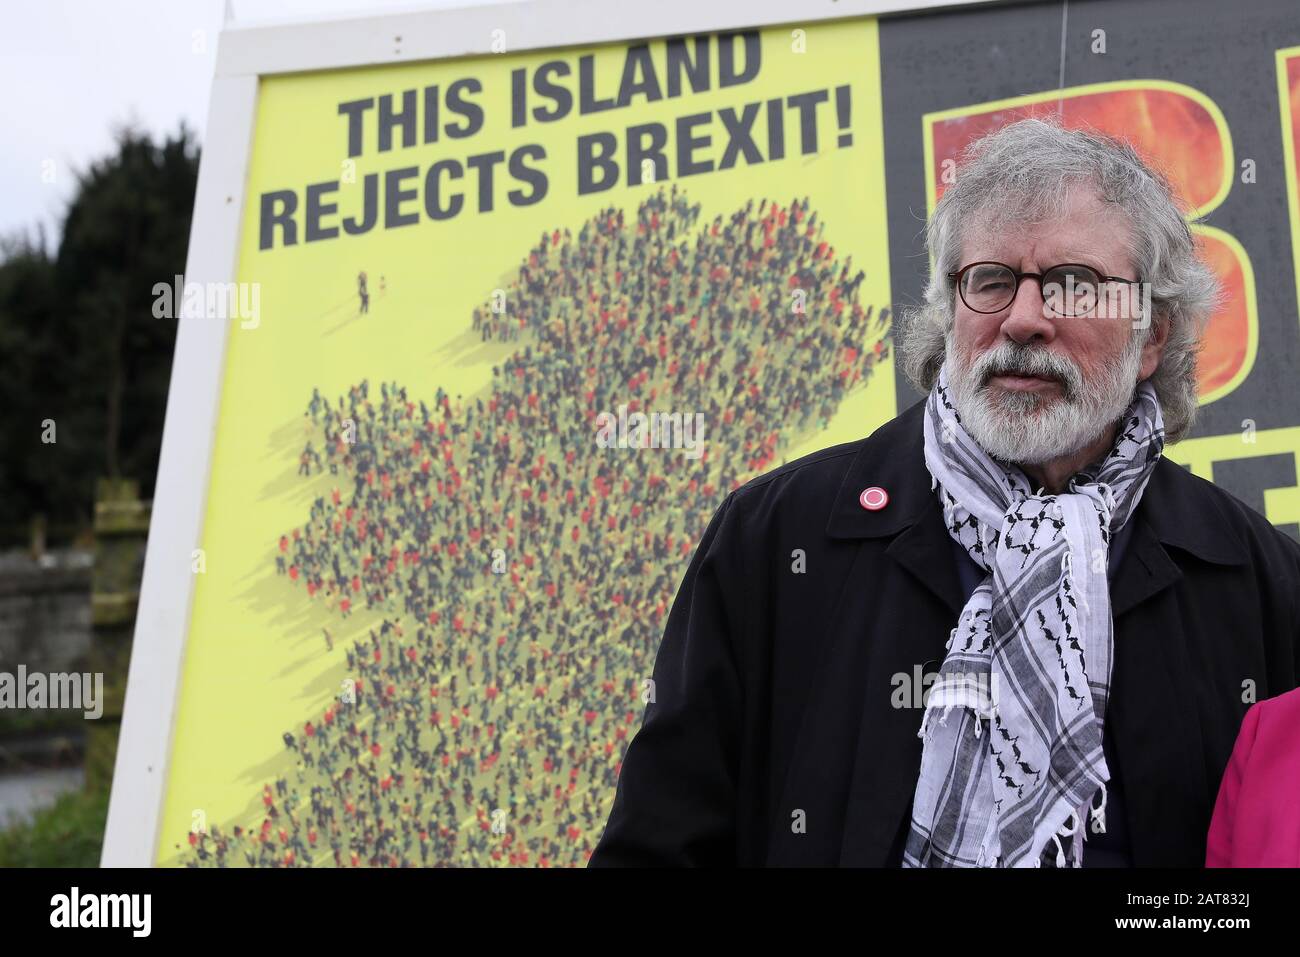 Former Sinn Fein leader Gerry Adams attends the unveiling of a Border Communities Against Brexit poster at a demonstration in Carrickcarnon on the Irish border, ahead of the UK leaving the European Union at 11pm on Friday. Stock Photo